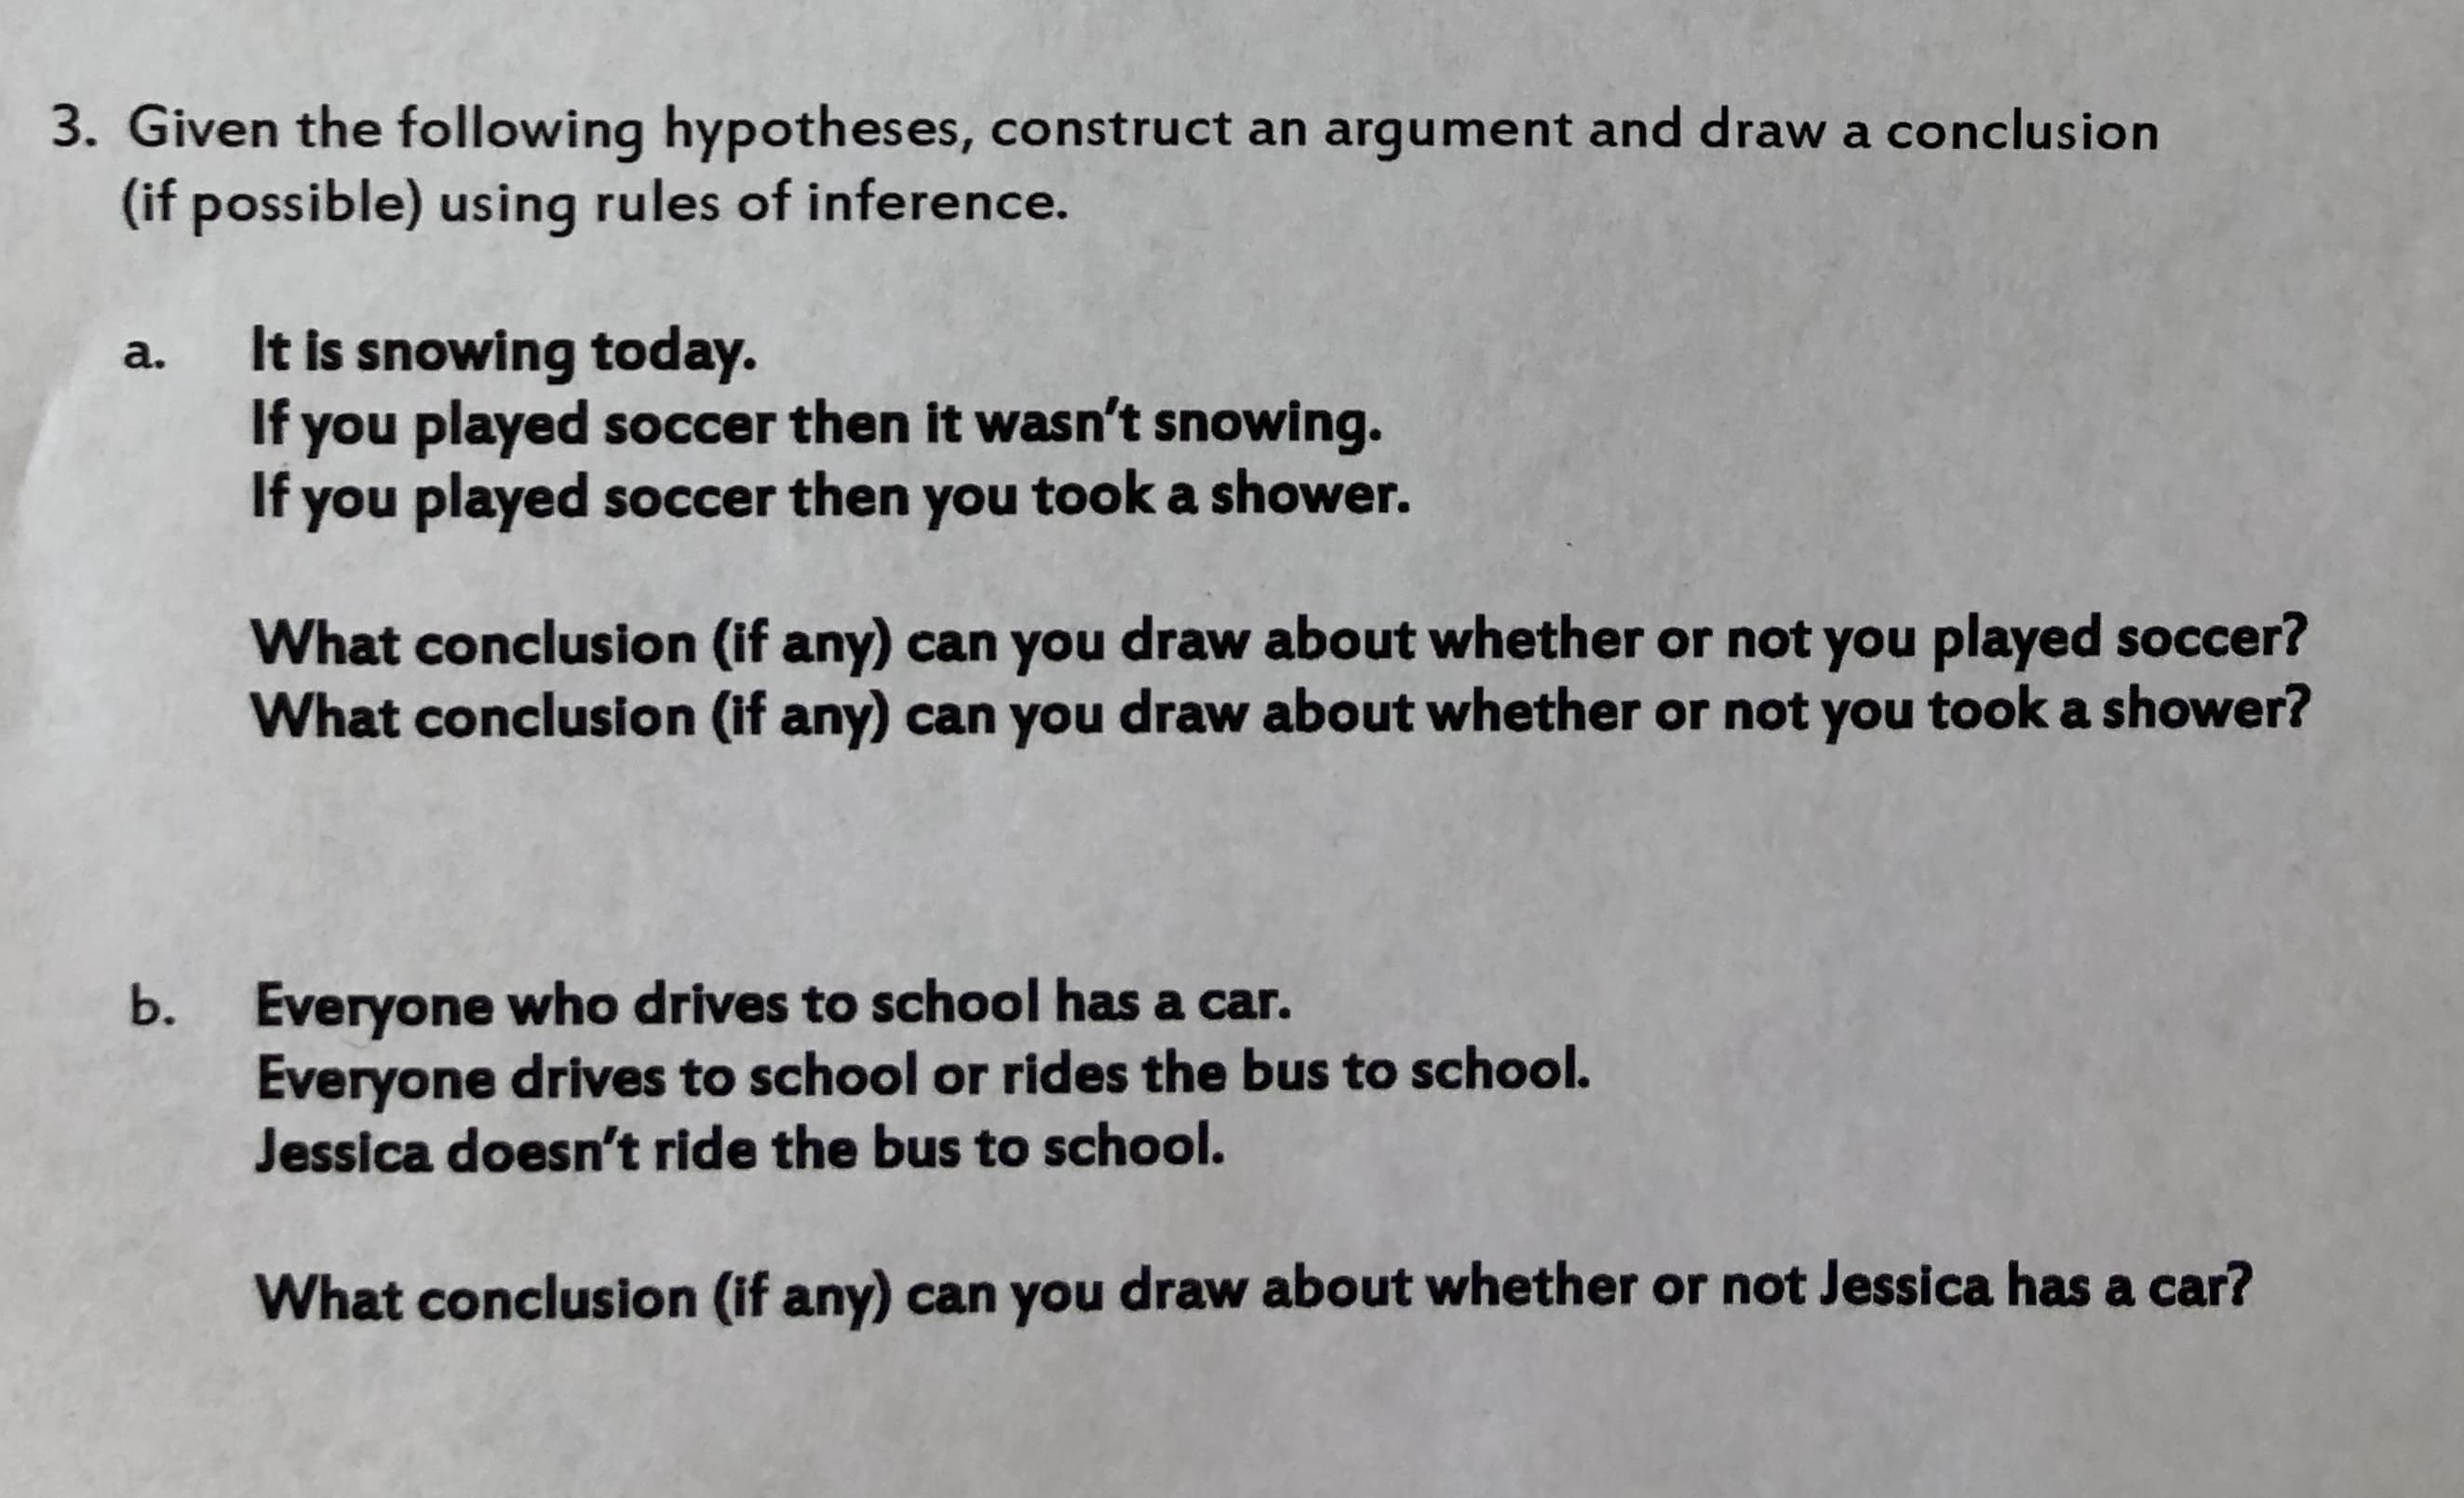 3. Given the following hypotheses, construct an argument and draw a conclusion
(if possible) using rules of inference.
a. It is snowing today.
If you played soccer then it wasn't snowing.
If you played soccer then you took a shower.
What conclusion (if any) can you draw about whether or not you played soccer?
What conclusion (if any) can you draw about whether or not you took a shower?
Everyone who drives to school has a car.
Everyone drives to school or rides the bus to school.
Jessica doesn't ride the bus to school.
b.
What conclusion (if any) can you draw about whether or not Jessica has a car?
